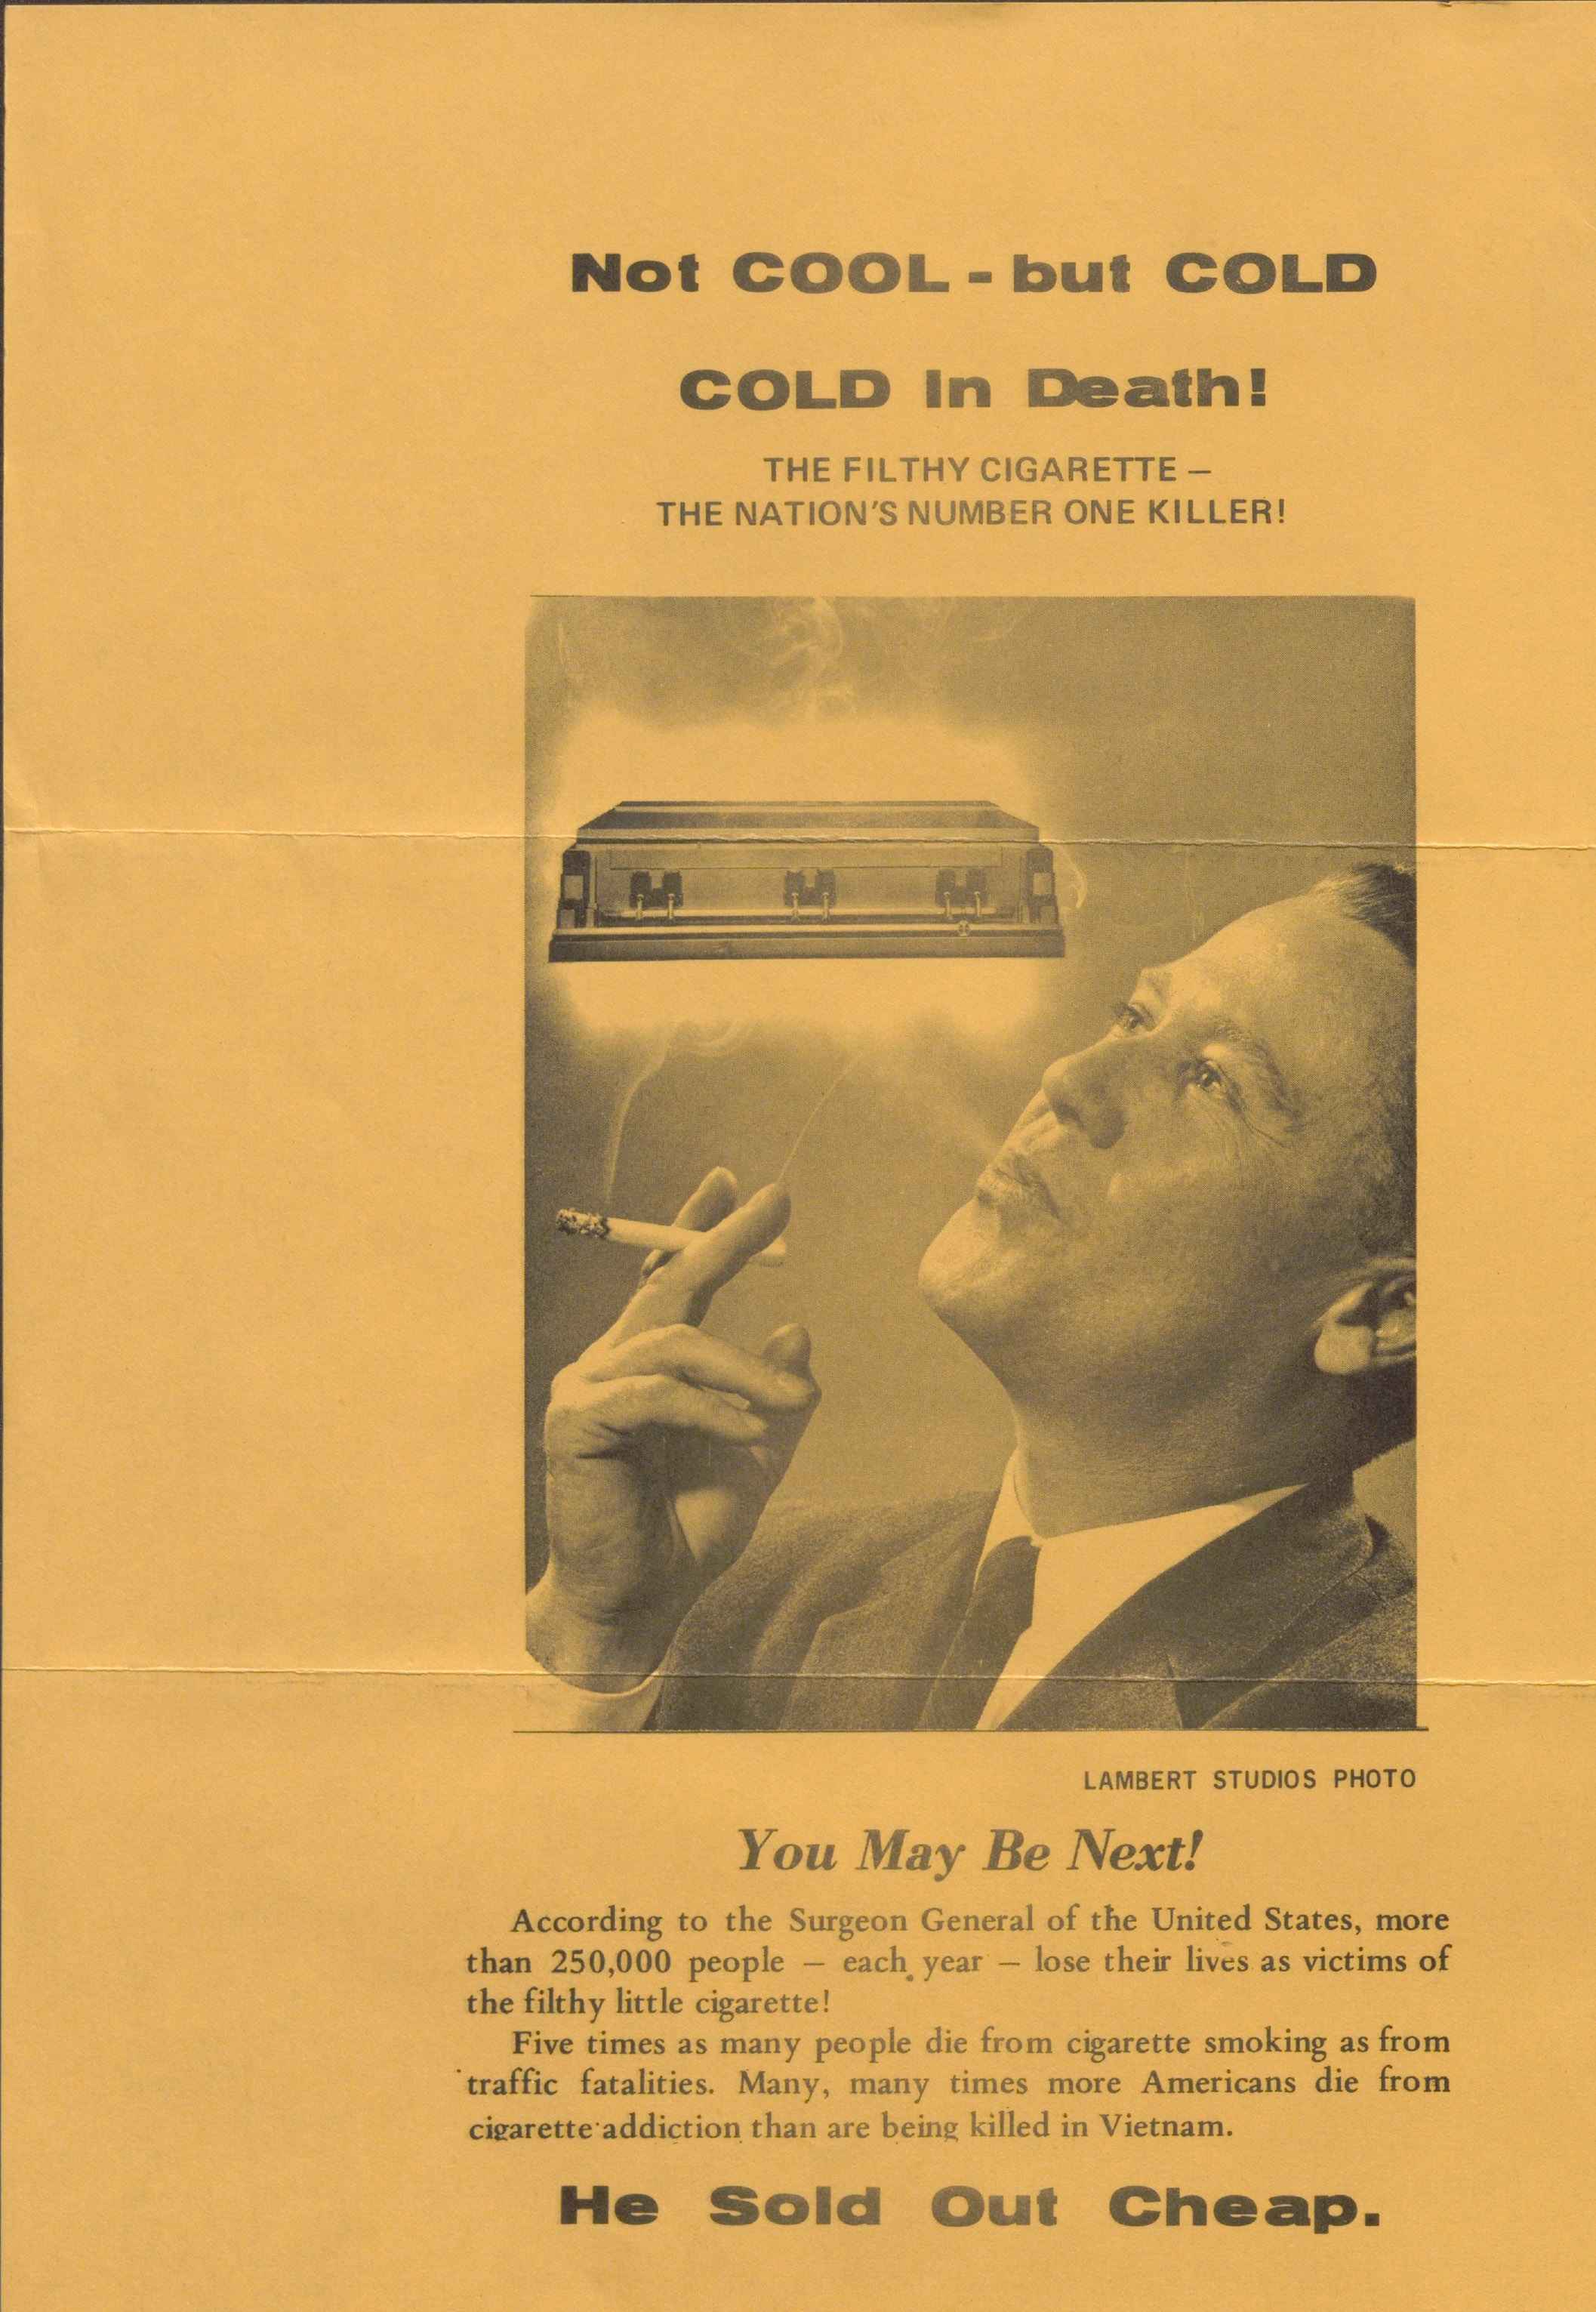 Page from a mass mailing letter about the dangers of smoking